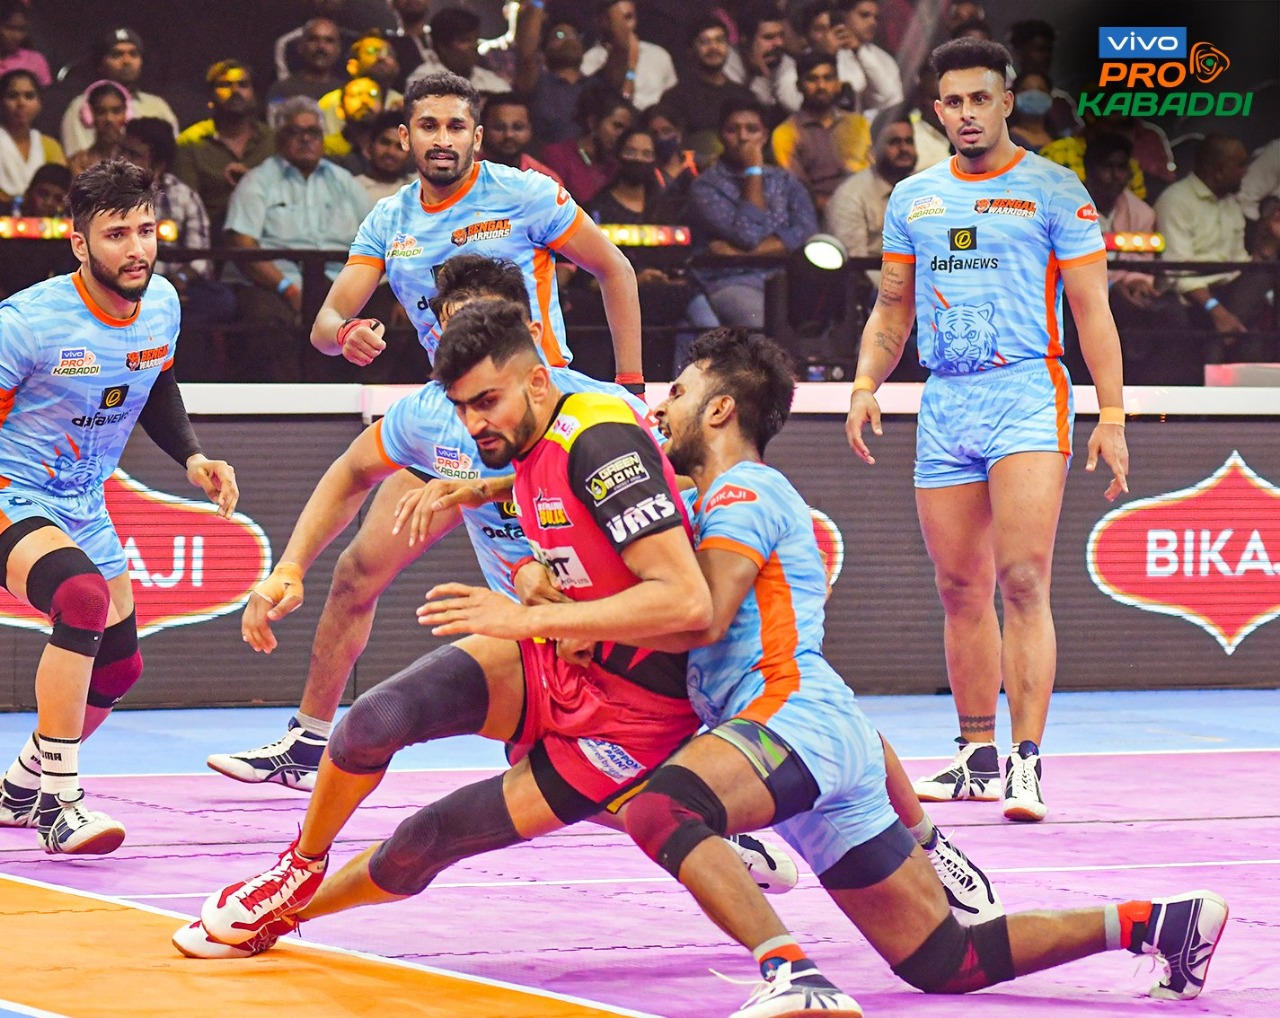 PKL 2022 LIVE: Table toppers Puneri Paltan face in form Jaipur Pink Panthers at 7:30 PM, Bengal Warriors face Bengaluru Bulls at 8:30 PM IST - Follow LIVE Updates